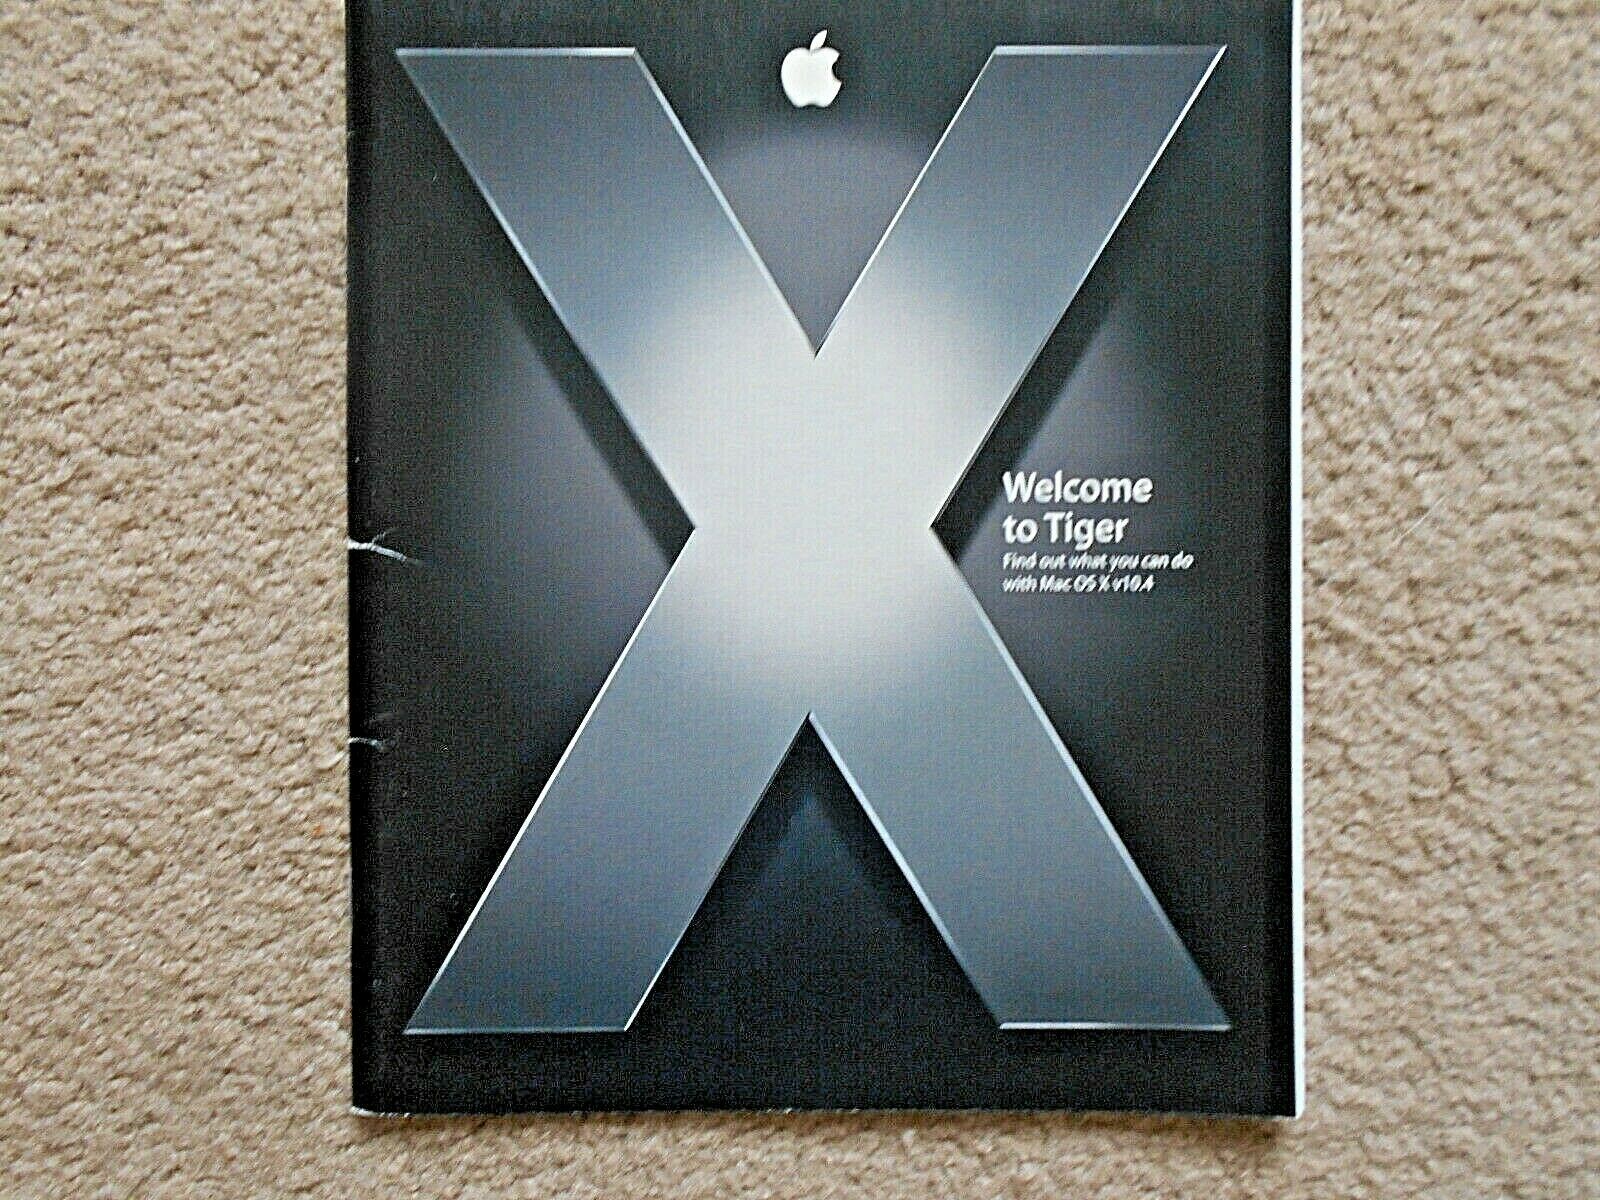 Welcome to Tiger Mac OS X v.10.4 Manual - $11.87